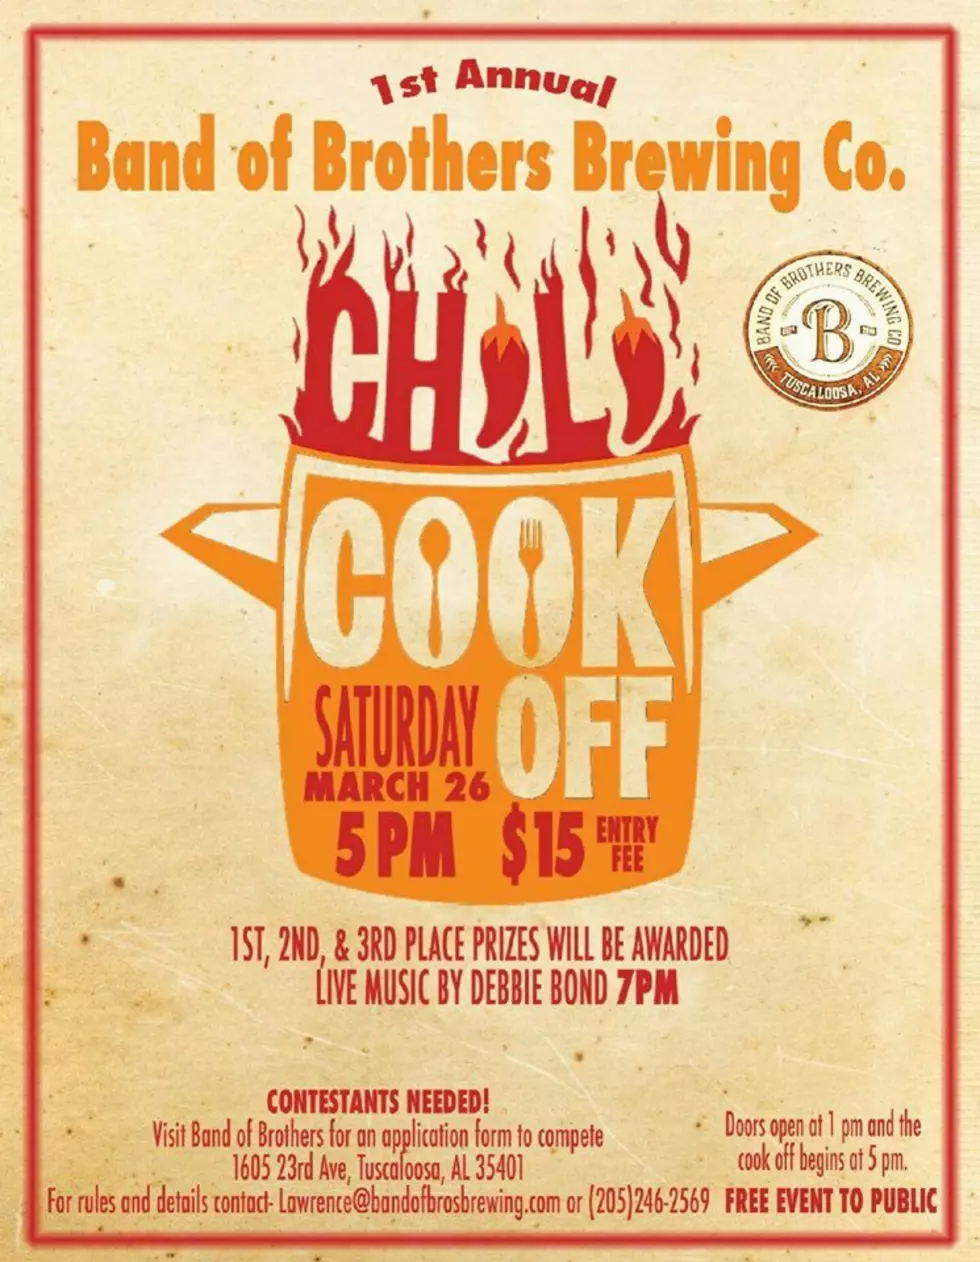 Tuscaloosa Brewery to Host Chili Cook-off Saturday